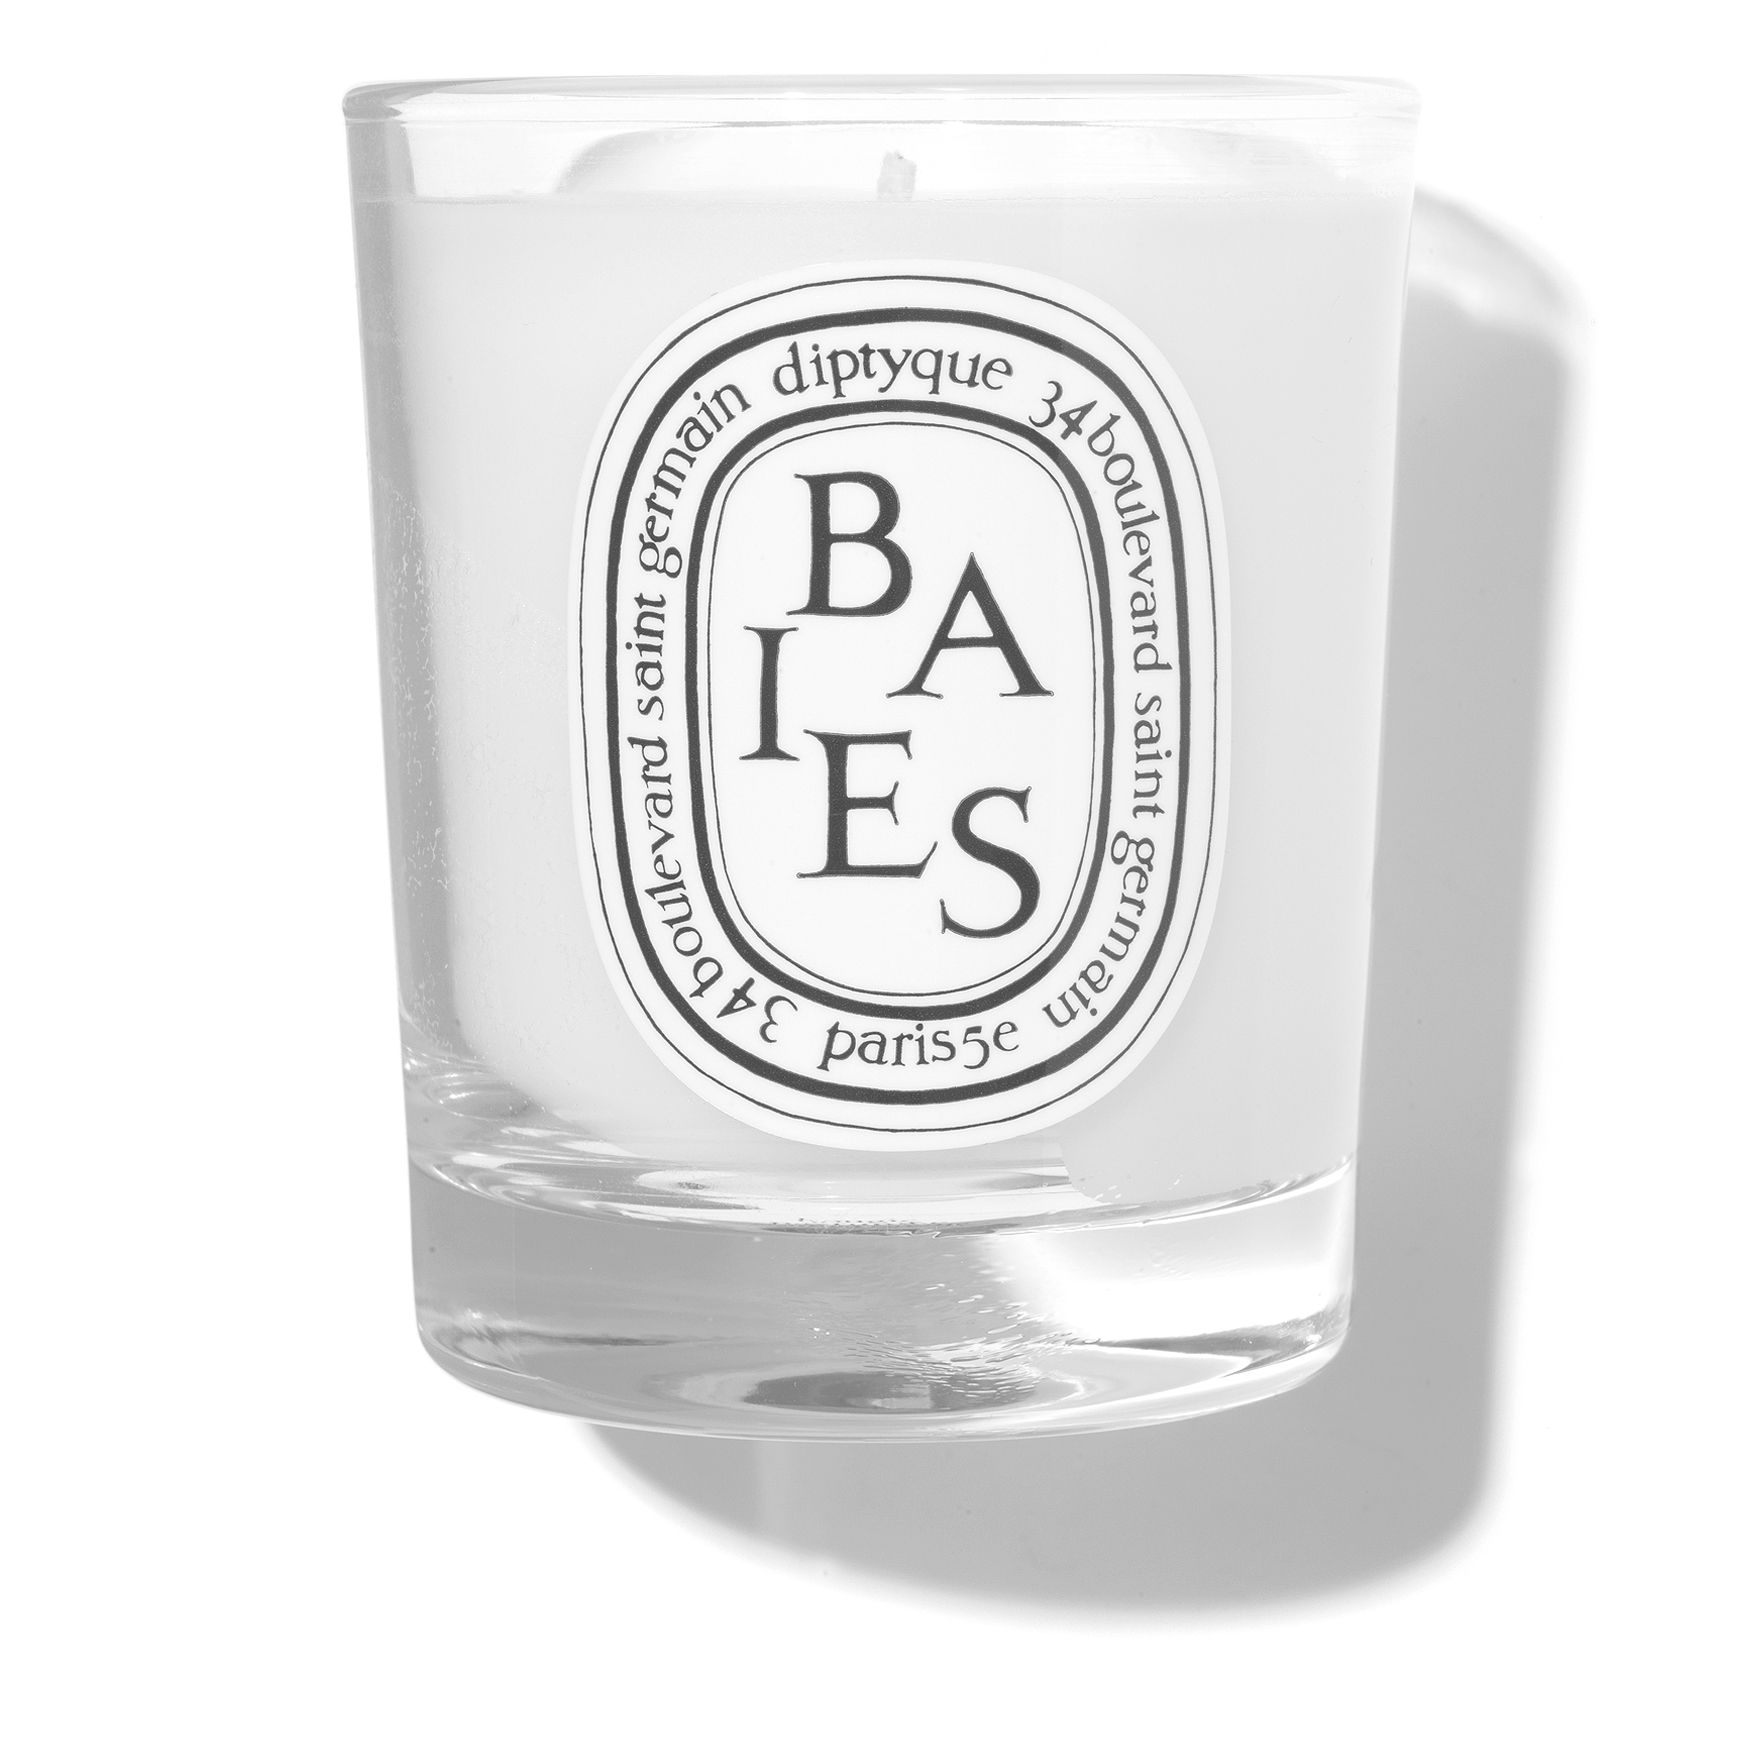 Baies Scented Candle 190g | Space NK (EU)